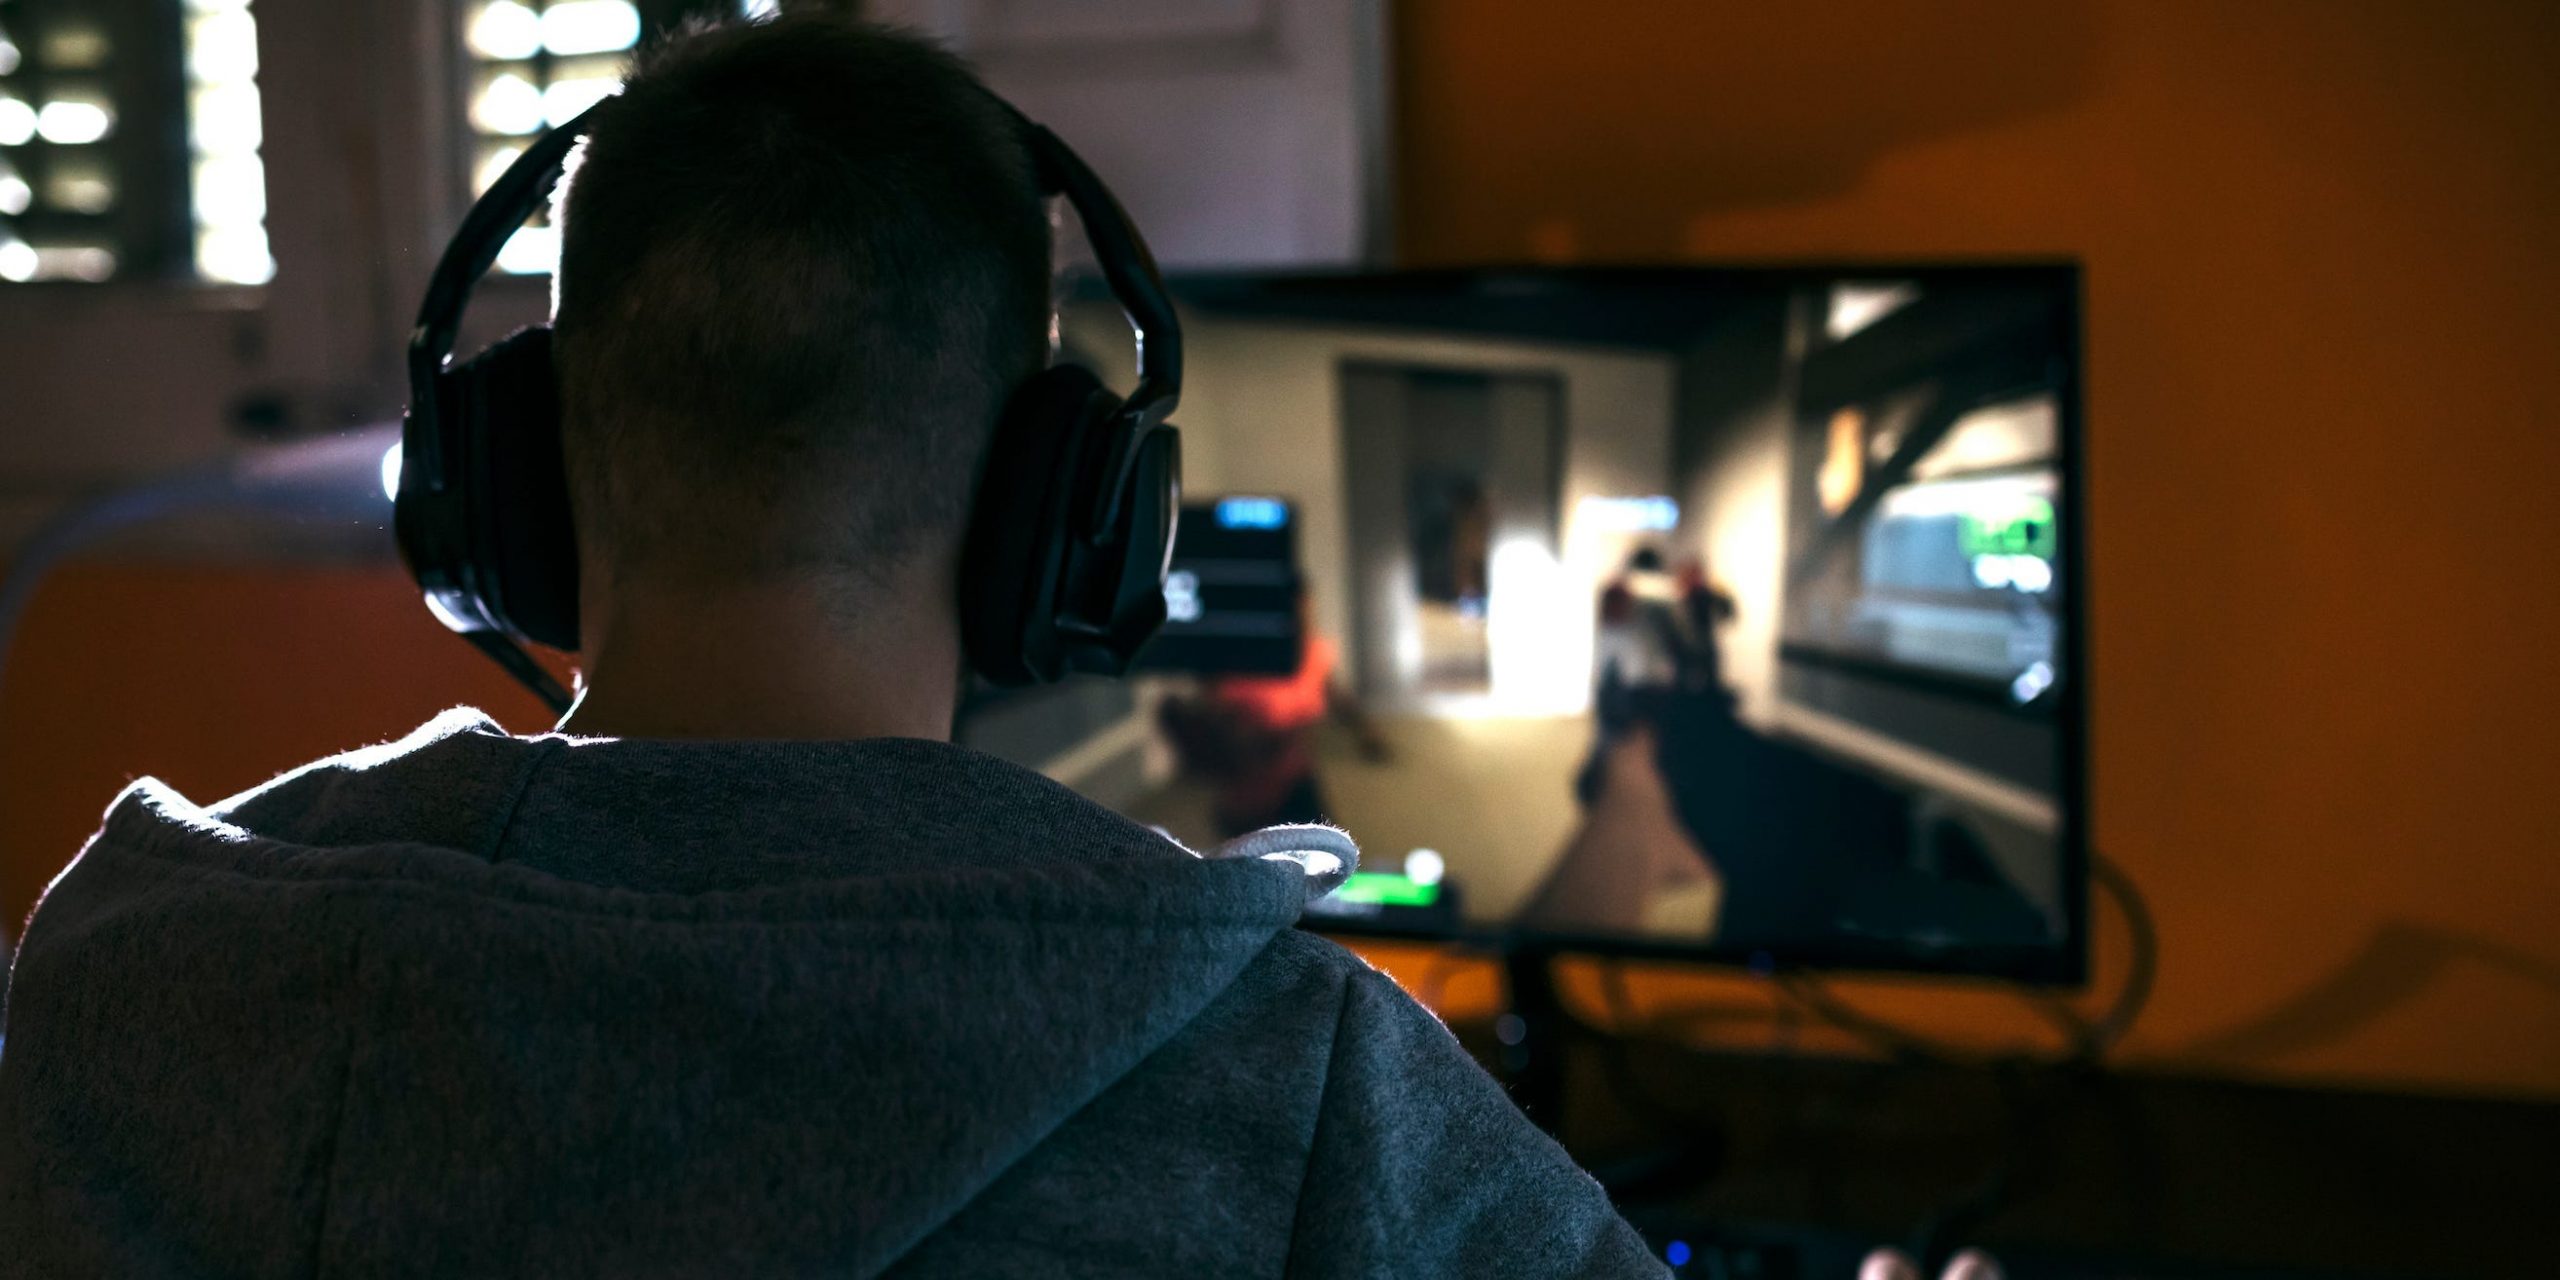 A man with headphones on plays a shooting game on his Windows PC computer.